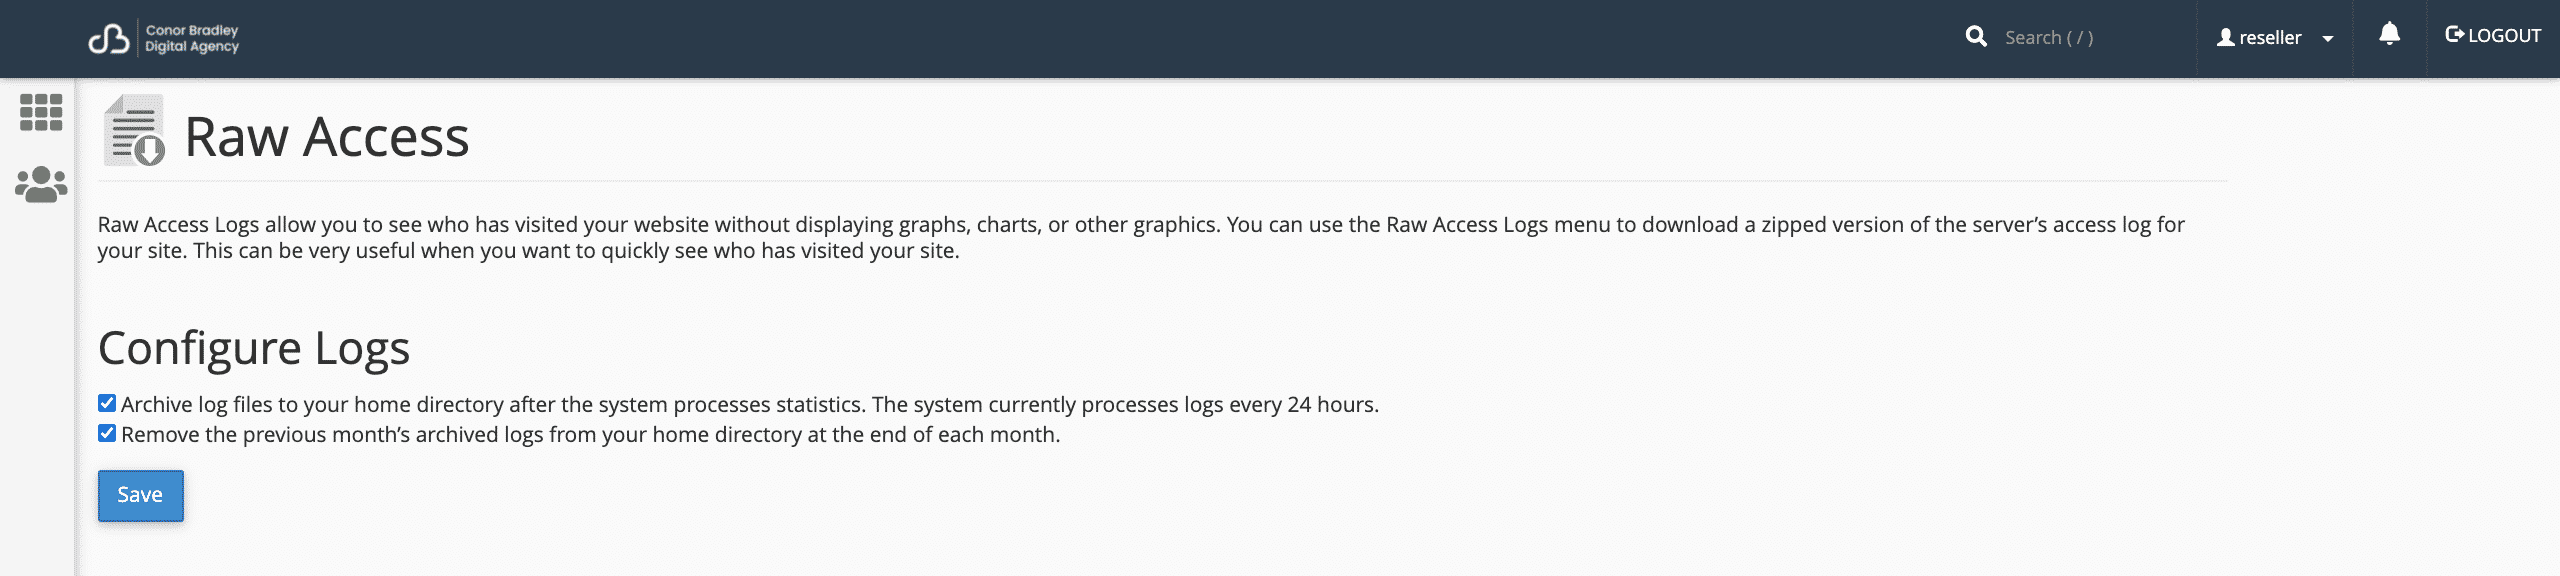 How to set up raw access logs in cpanel conor bradley digital agency